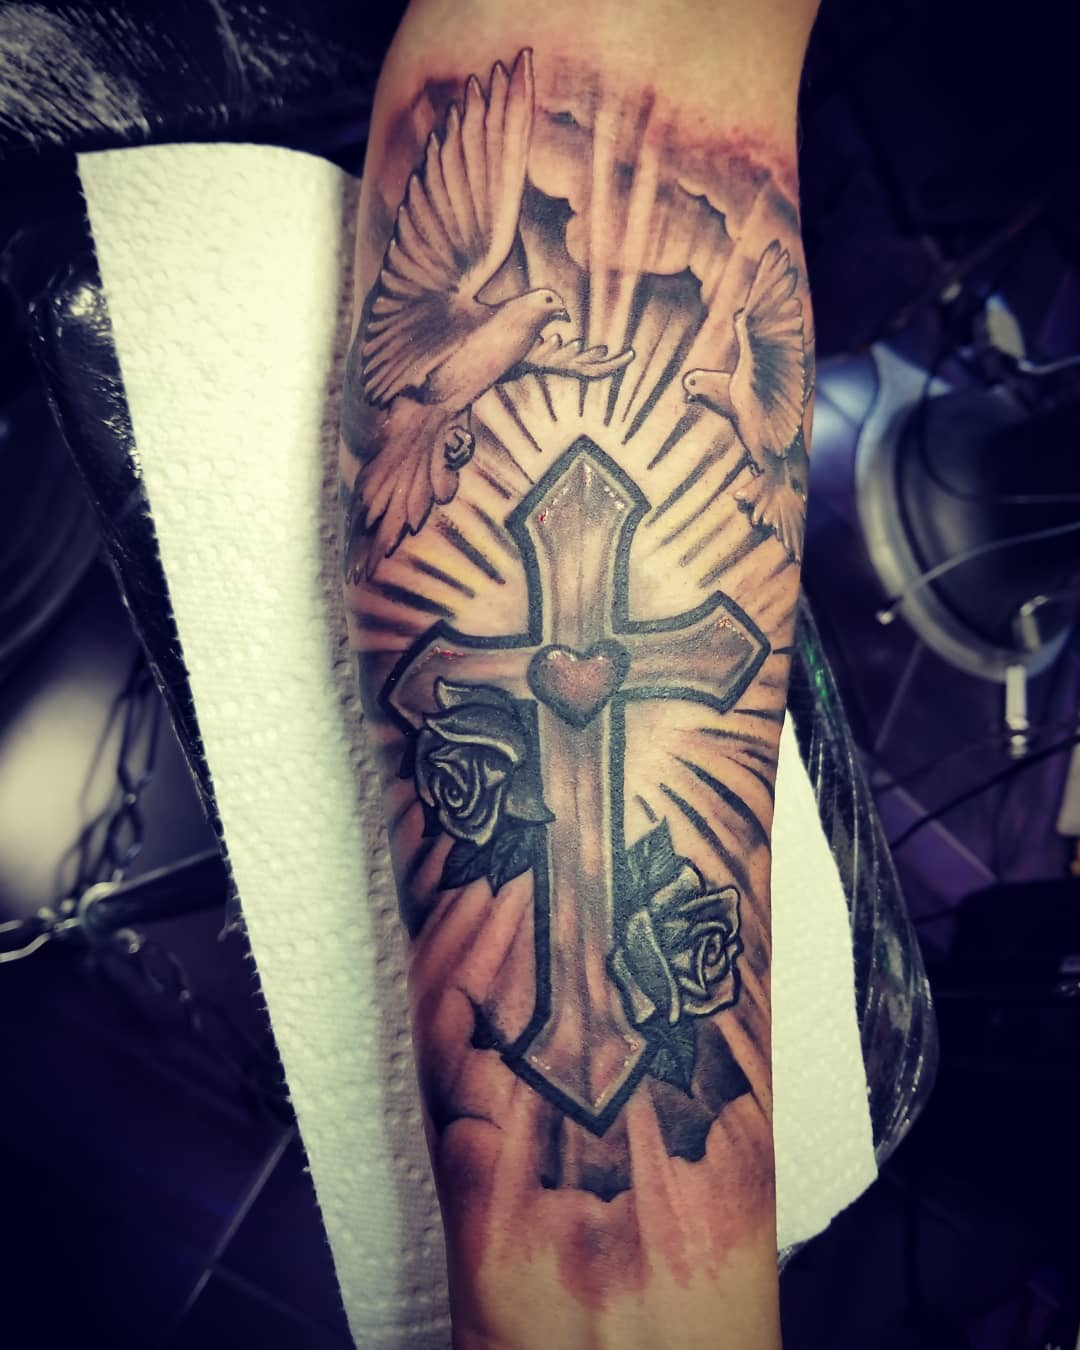 225 Best Cross Tattoo Designs With Meanings within dimensions 1080 X 1350